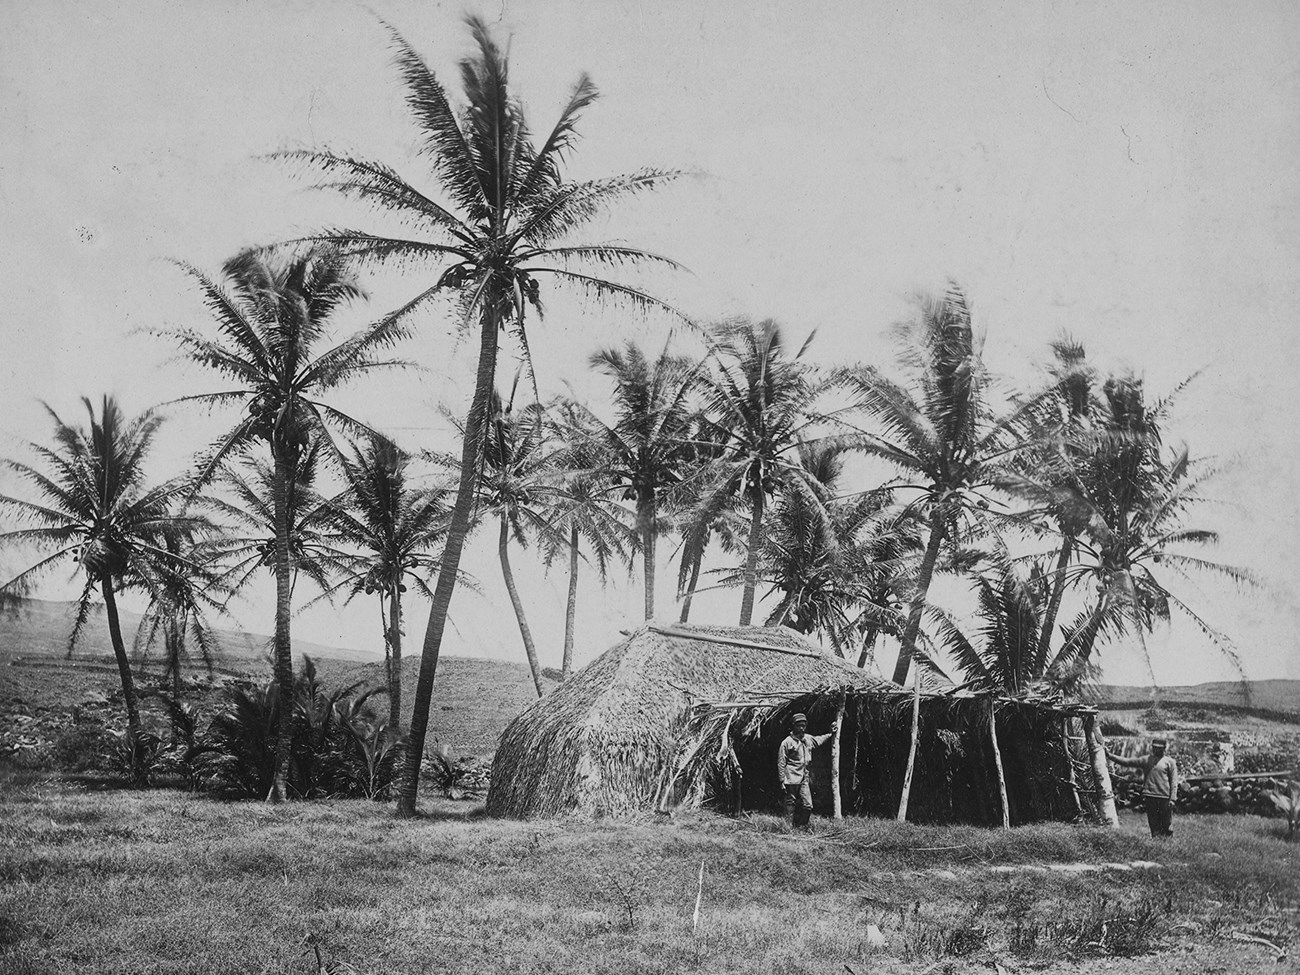 Photograph of grass huts with palm roof, surrounded by palm trees